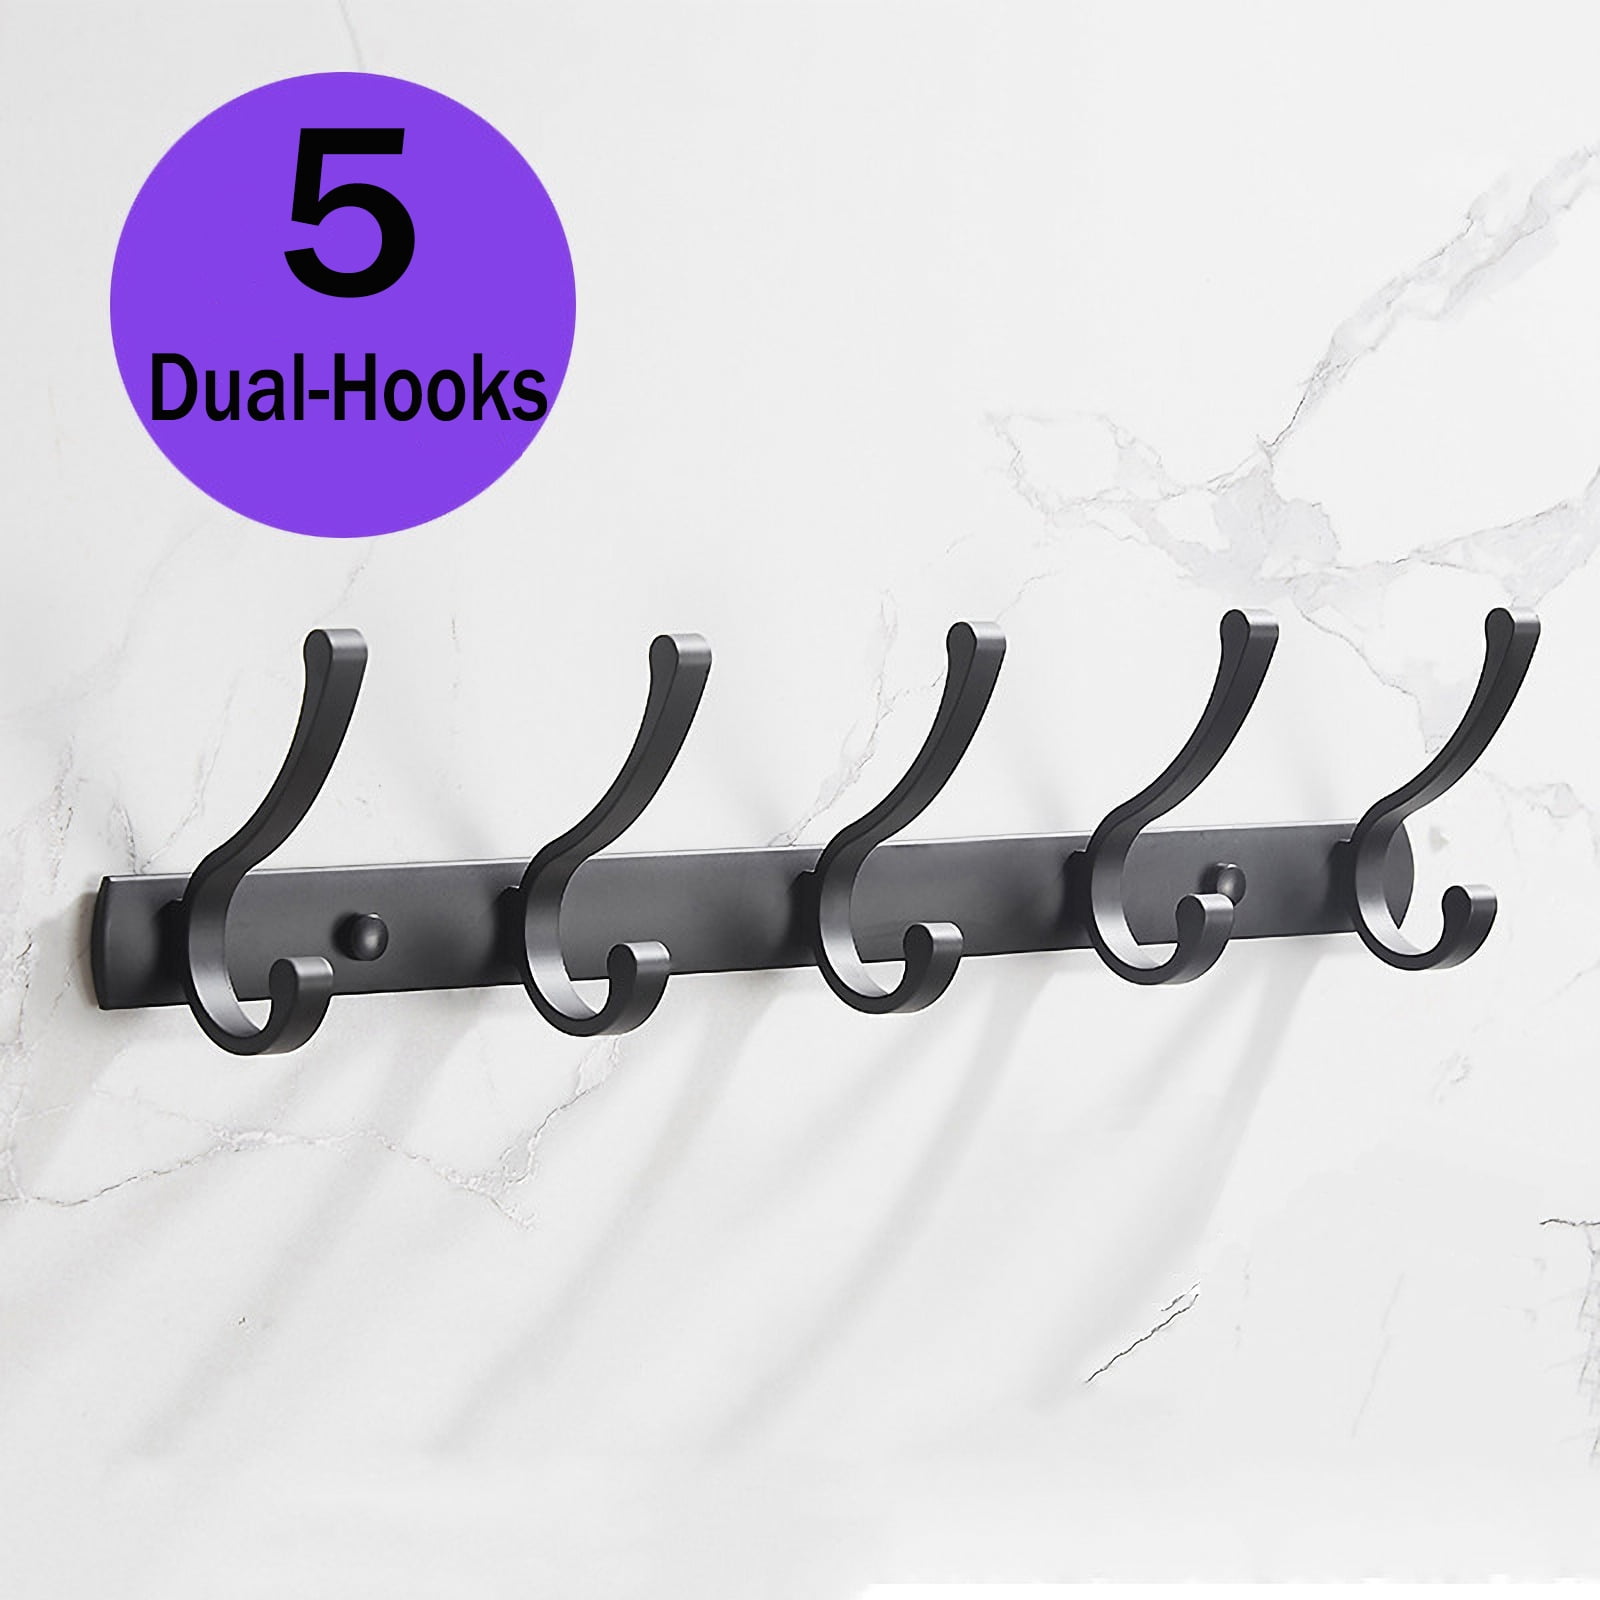 Coat Rack Wall Mounted, Dinosam Coat Hooks for Hanging Coats,Heavy Duty Metal Hook Rack Rail with 6 Hooks Coat Hanger Wall Mount for Purse Clothes